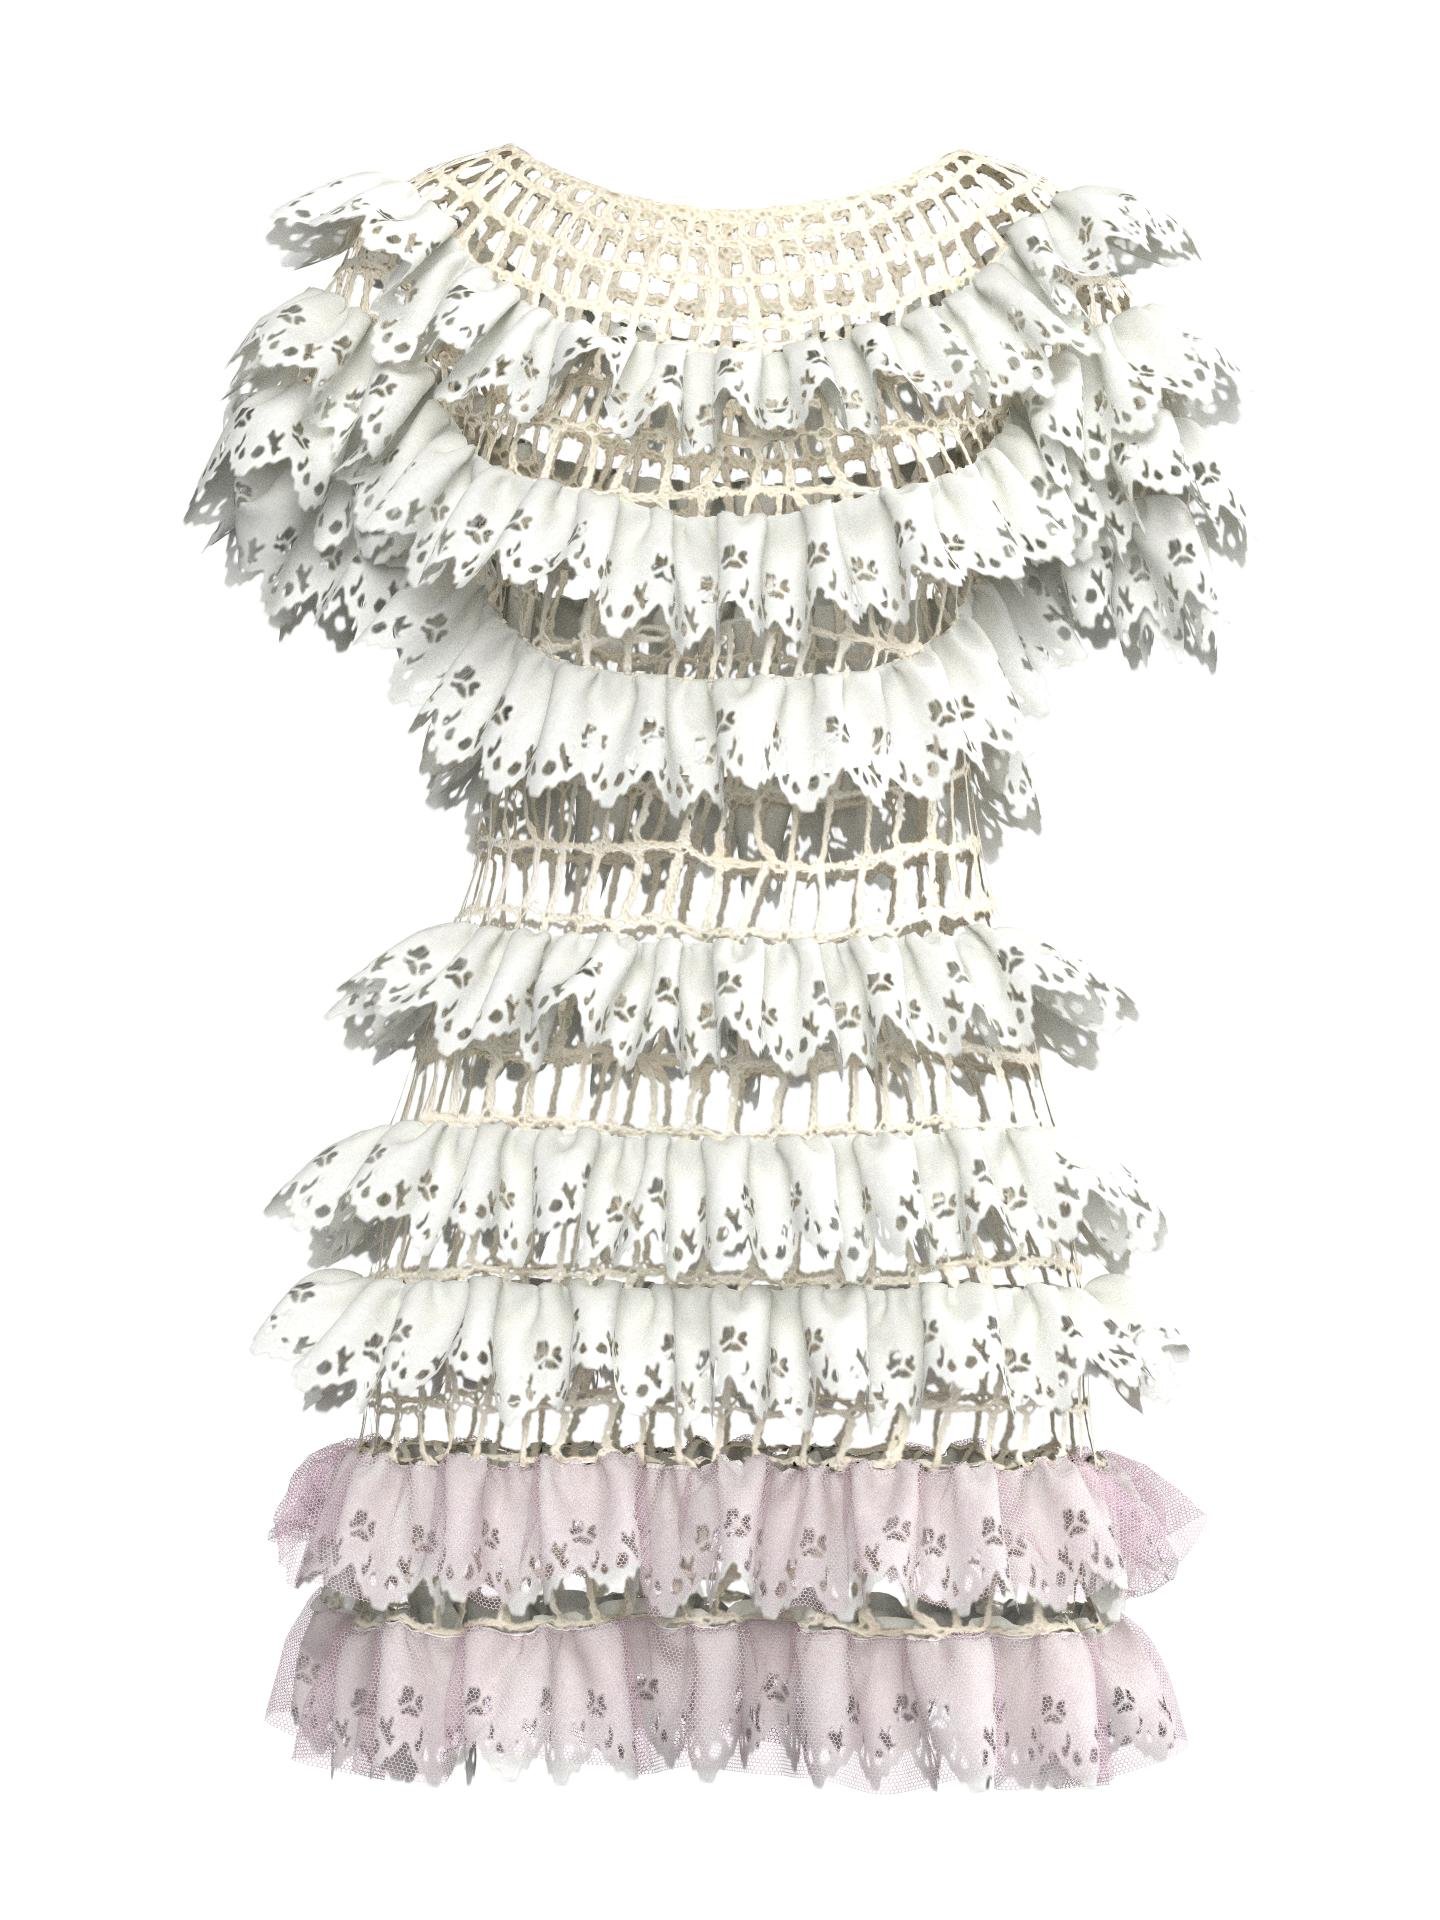 White Crocheted Dress by SUSAN FANG